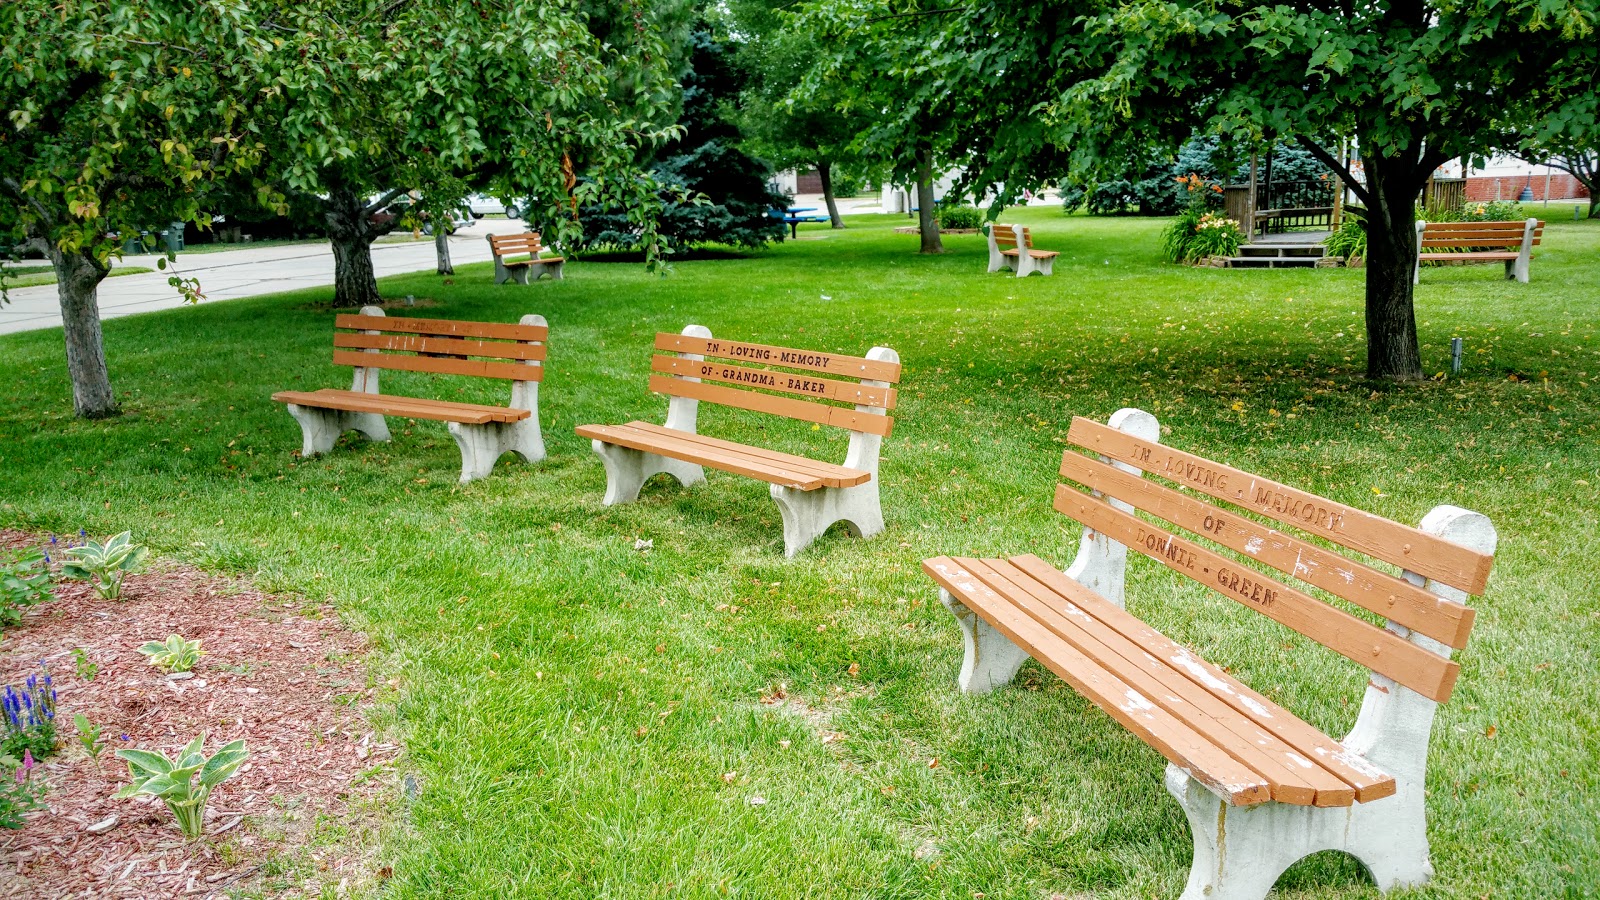 History and Culture by Bicycle: North Sioux City: Memorial Benches